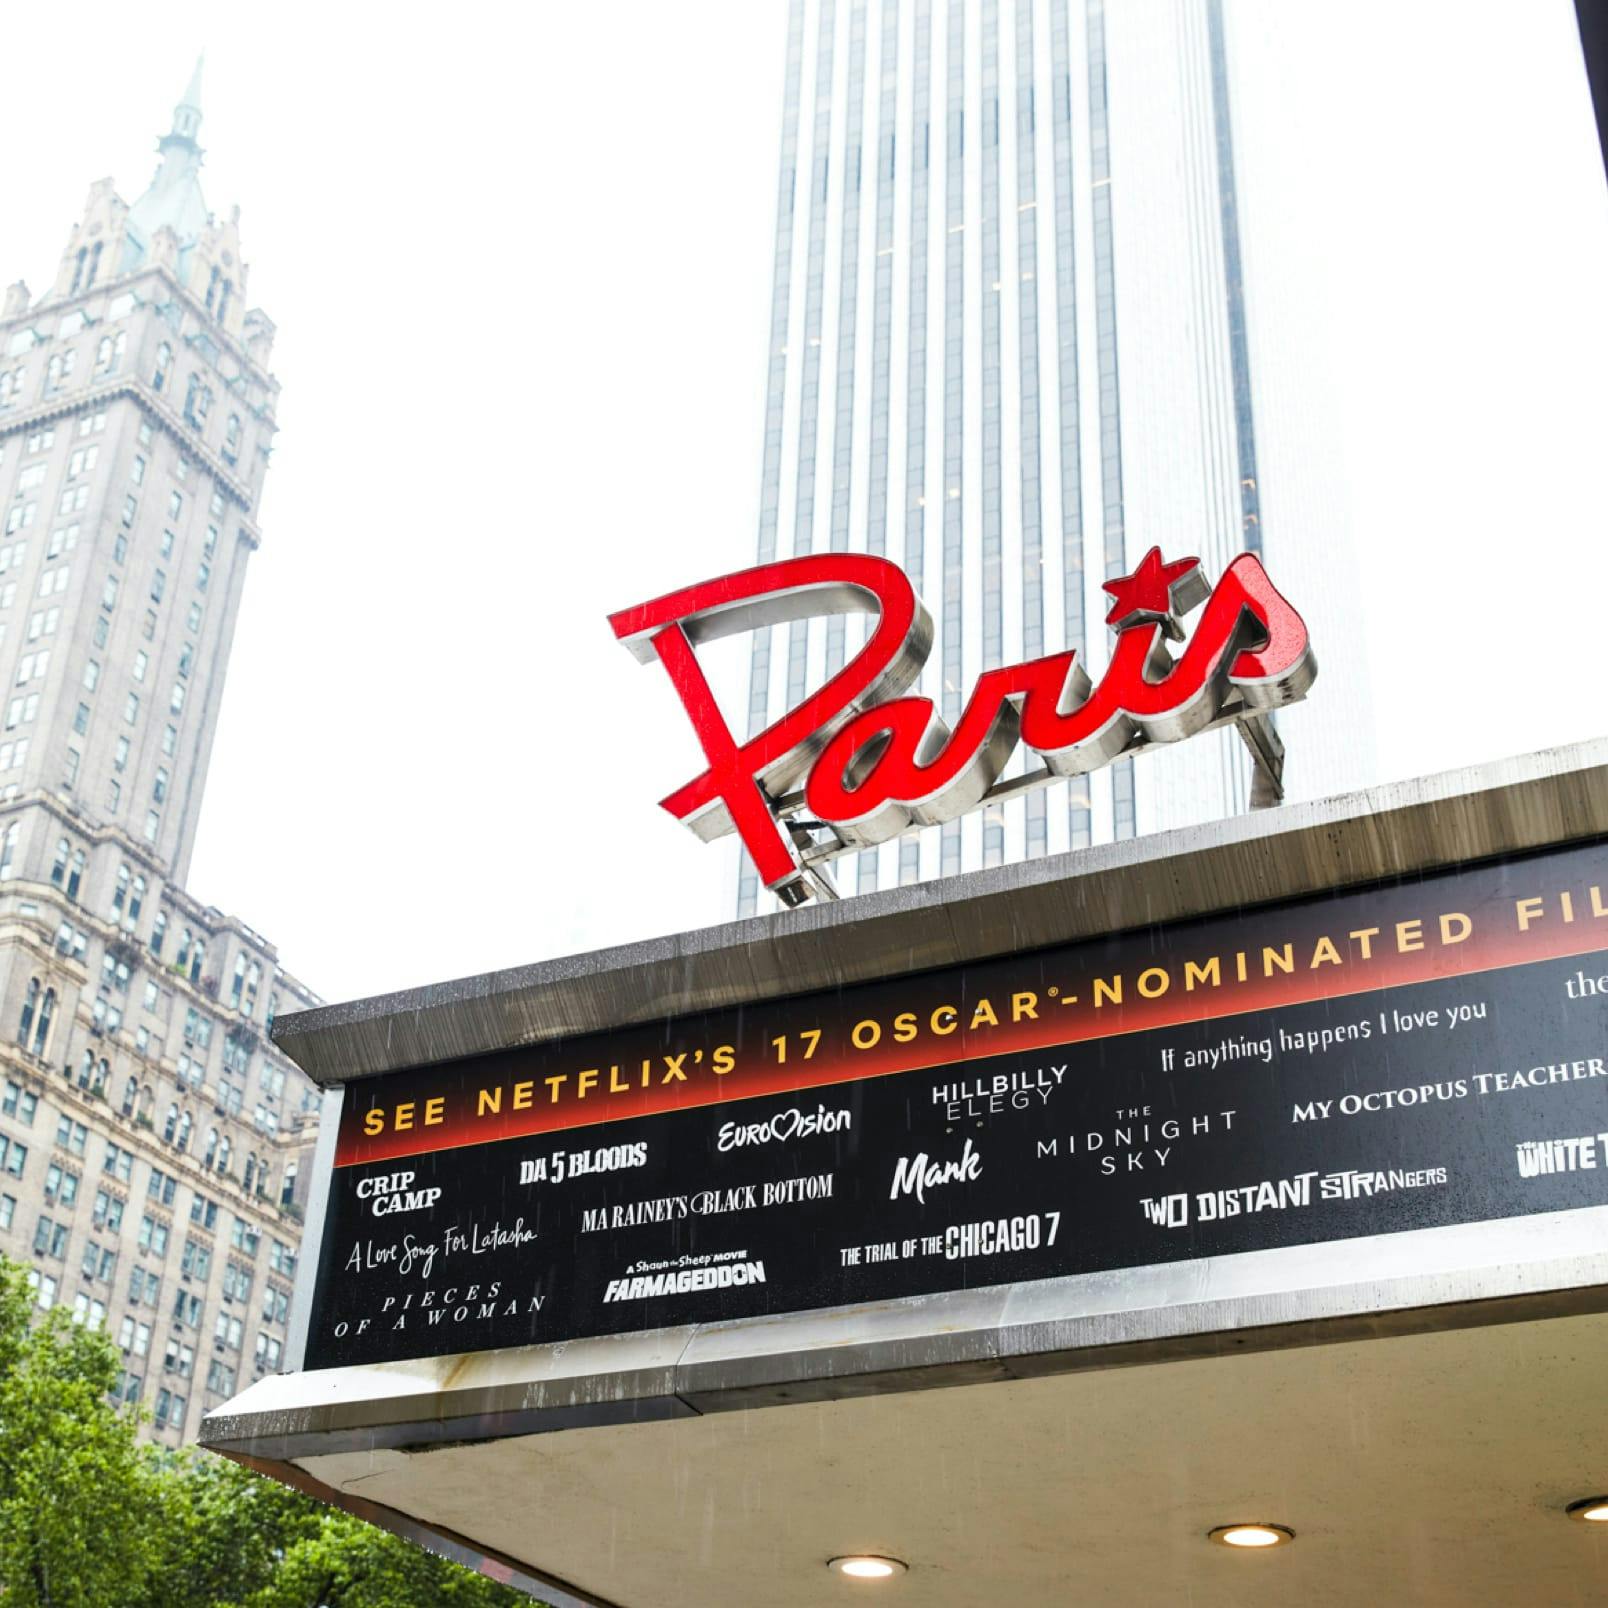 The outside of the Paris Theater. In the background is the plaza hotel, a silvery high rise building, and some trees. Names of Netflix films are written in white on a black marquee, and the Paris head is in red, vintage font.